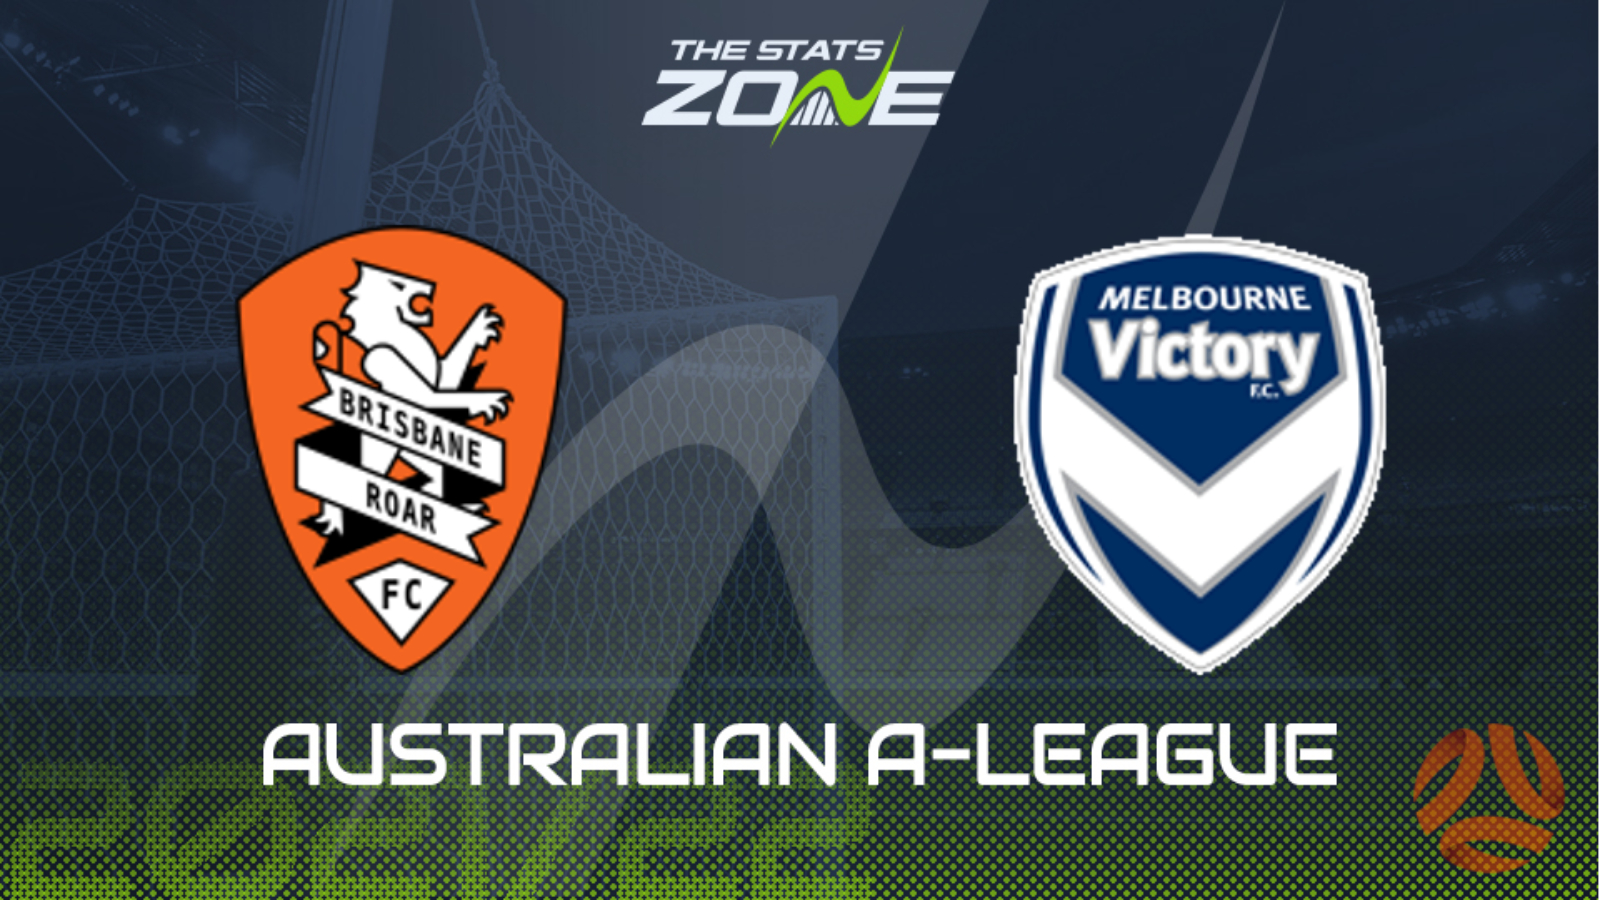 Brisbane roar vs melbourne victory betting between a rock and a hard place documentary